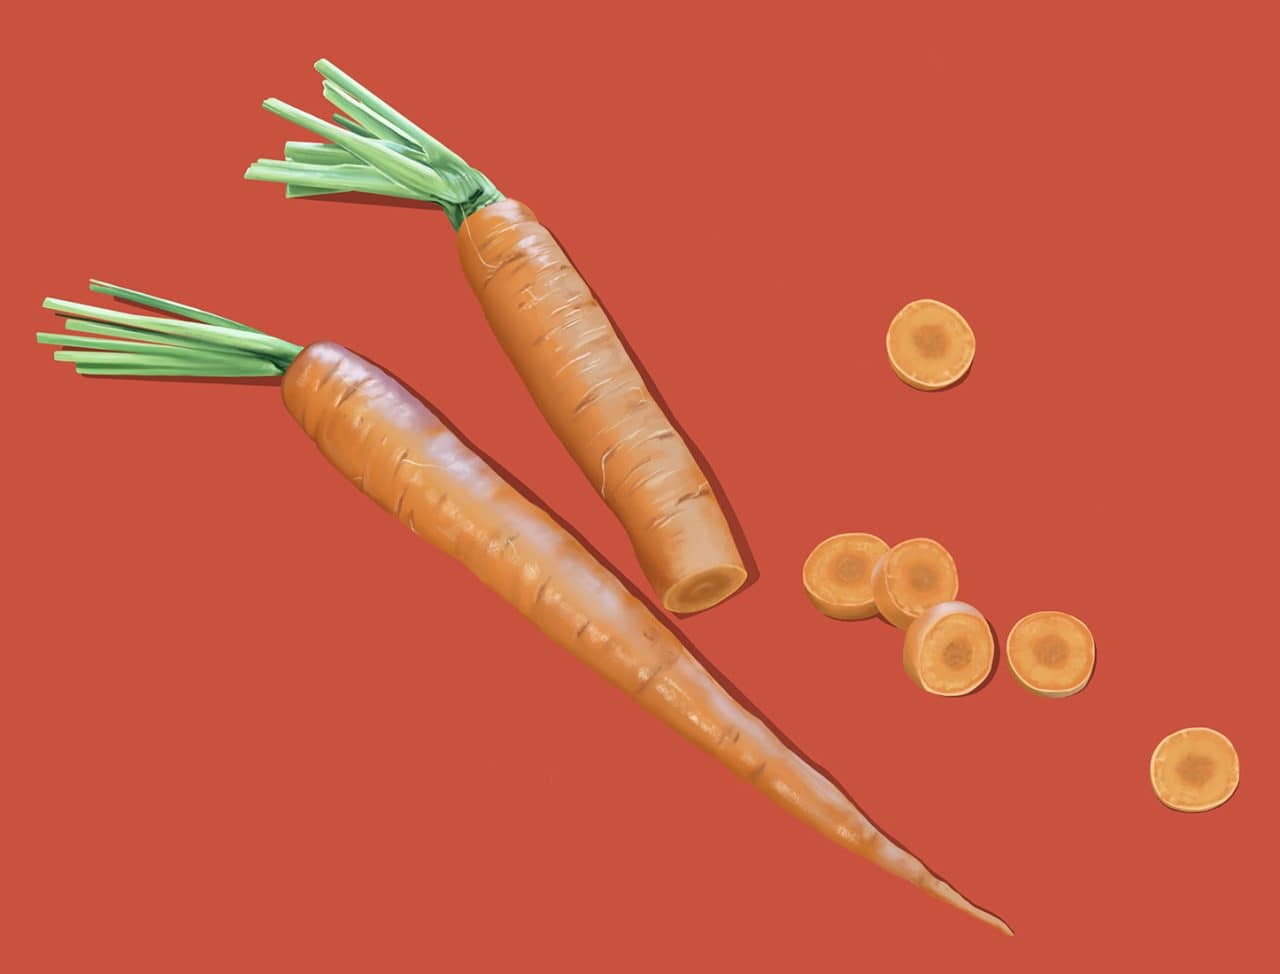 Toronto illustrator Mark Scheibmayr shares tips on how to draw carrots.